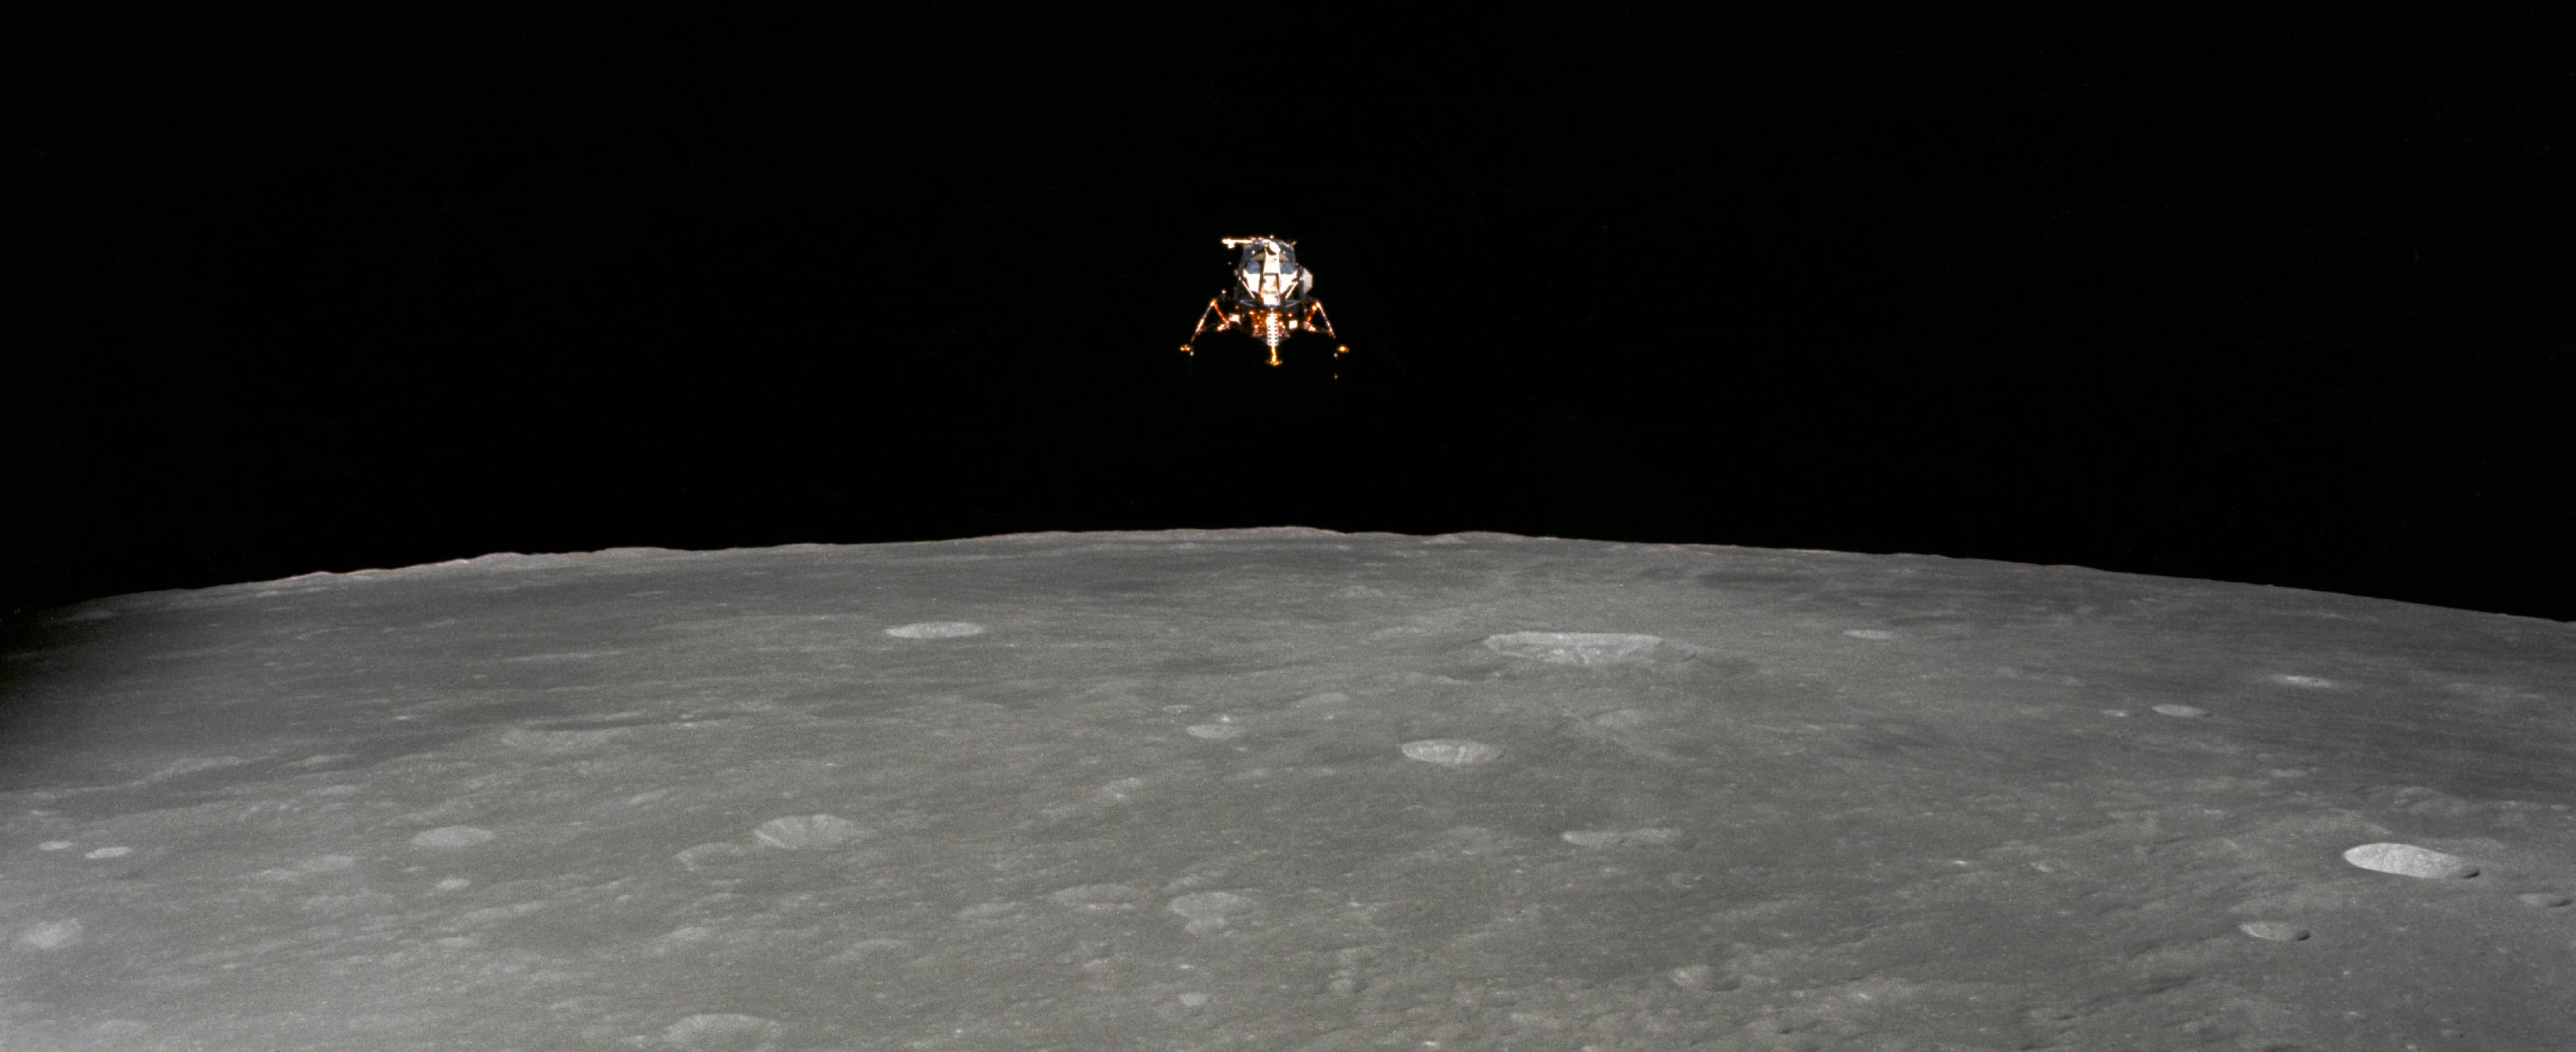 Lunar module hovering above the moon.